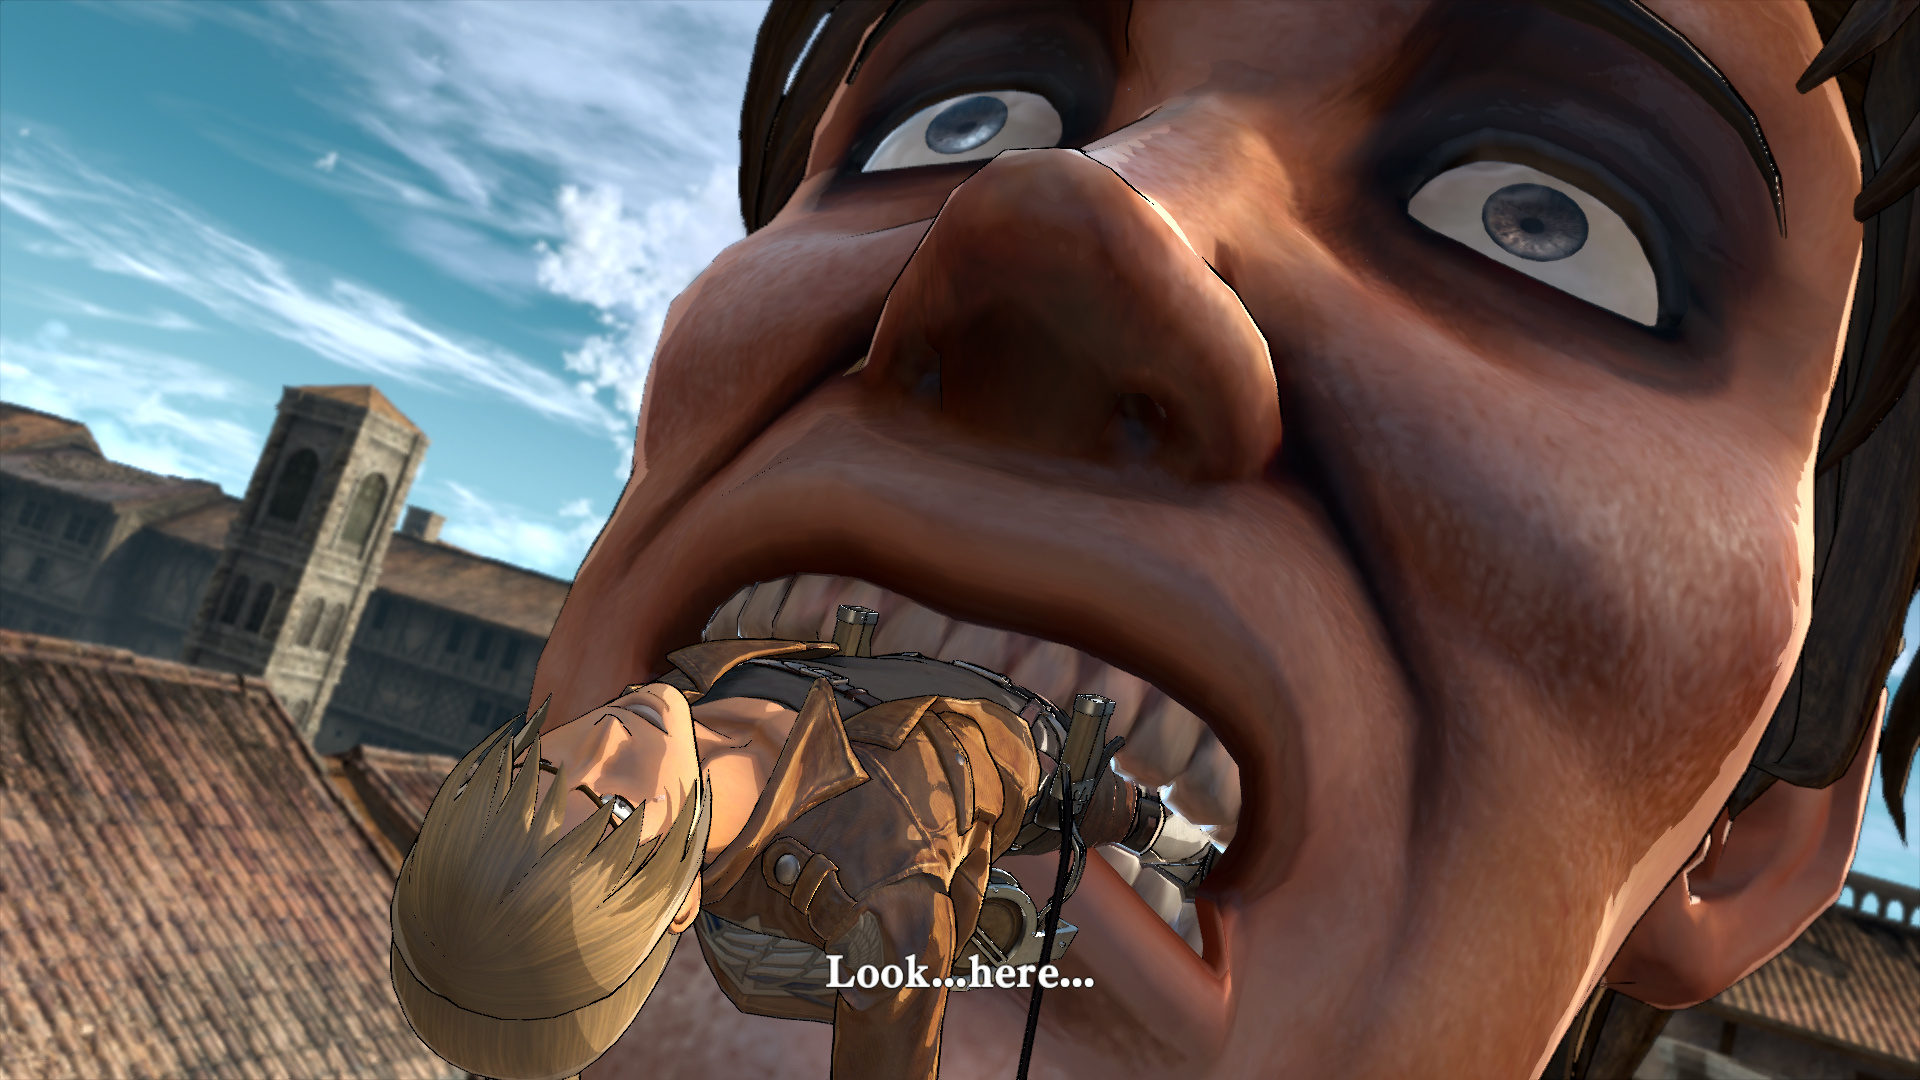 attack on titan game wings of freedom